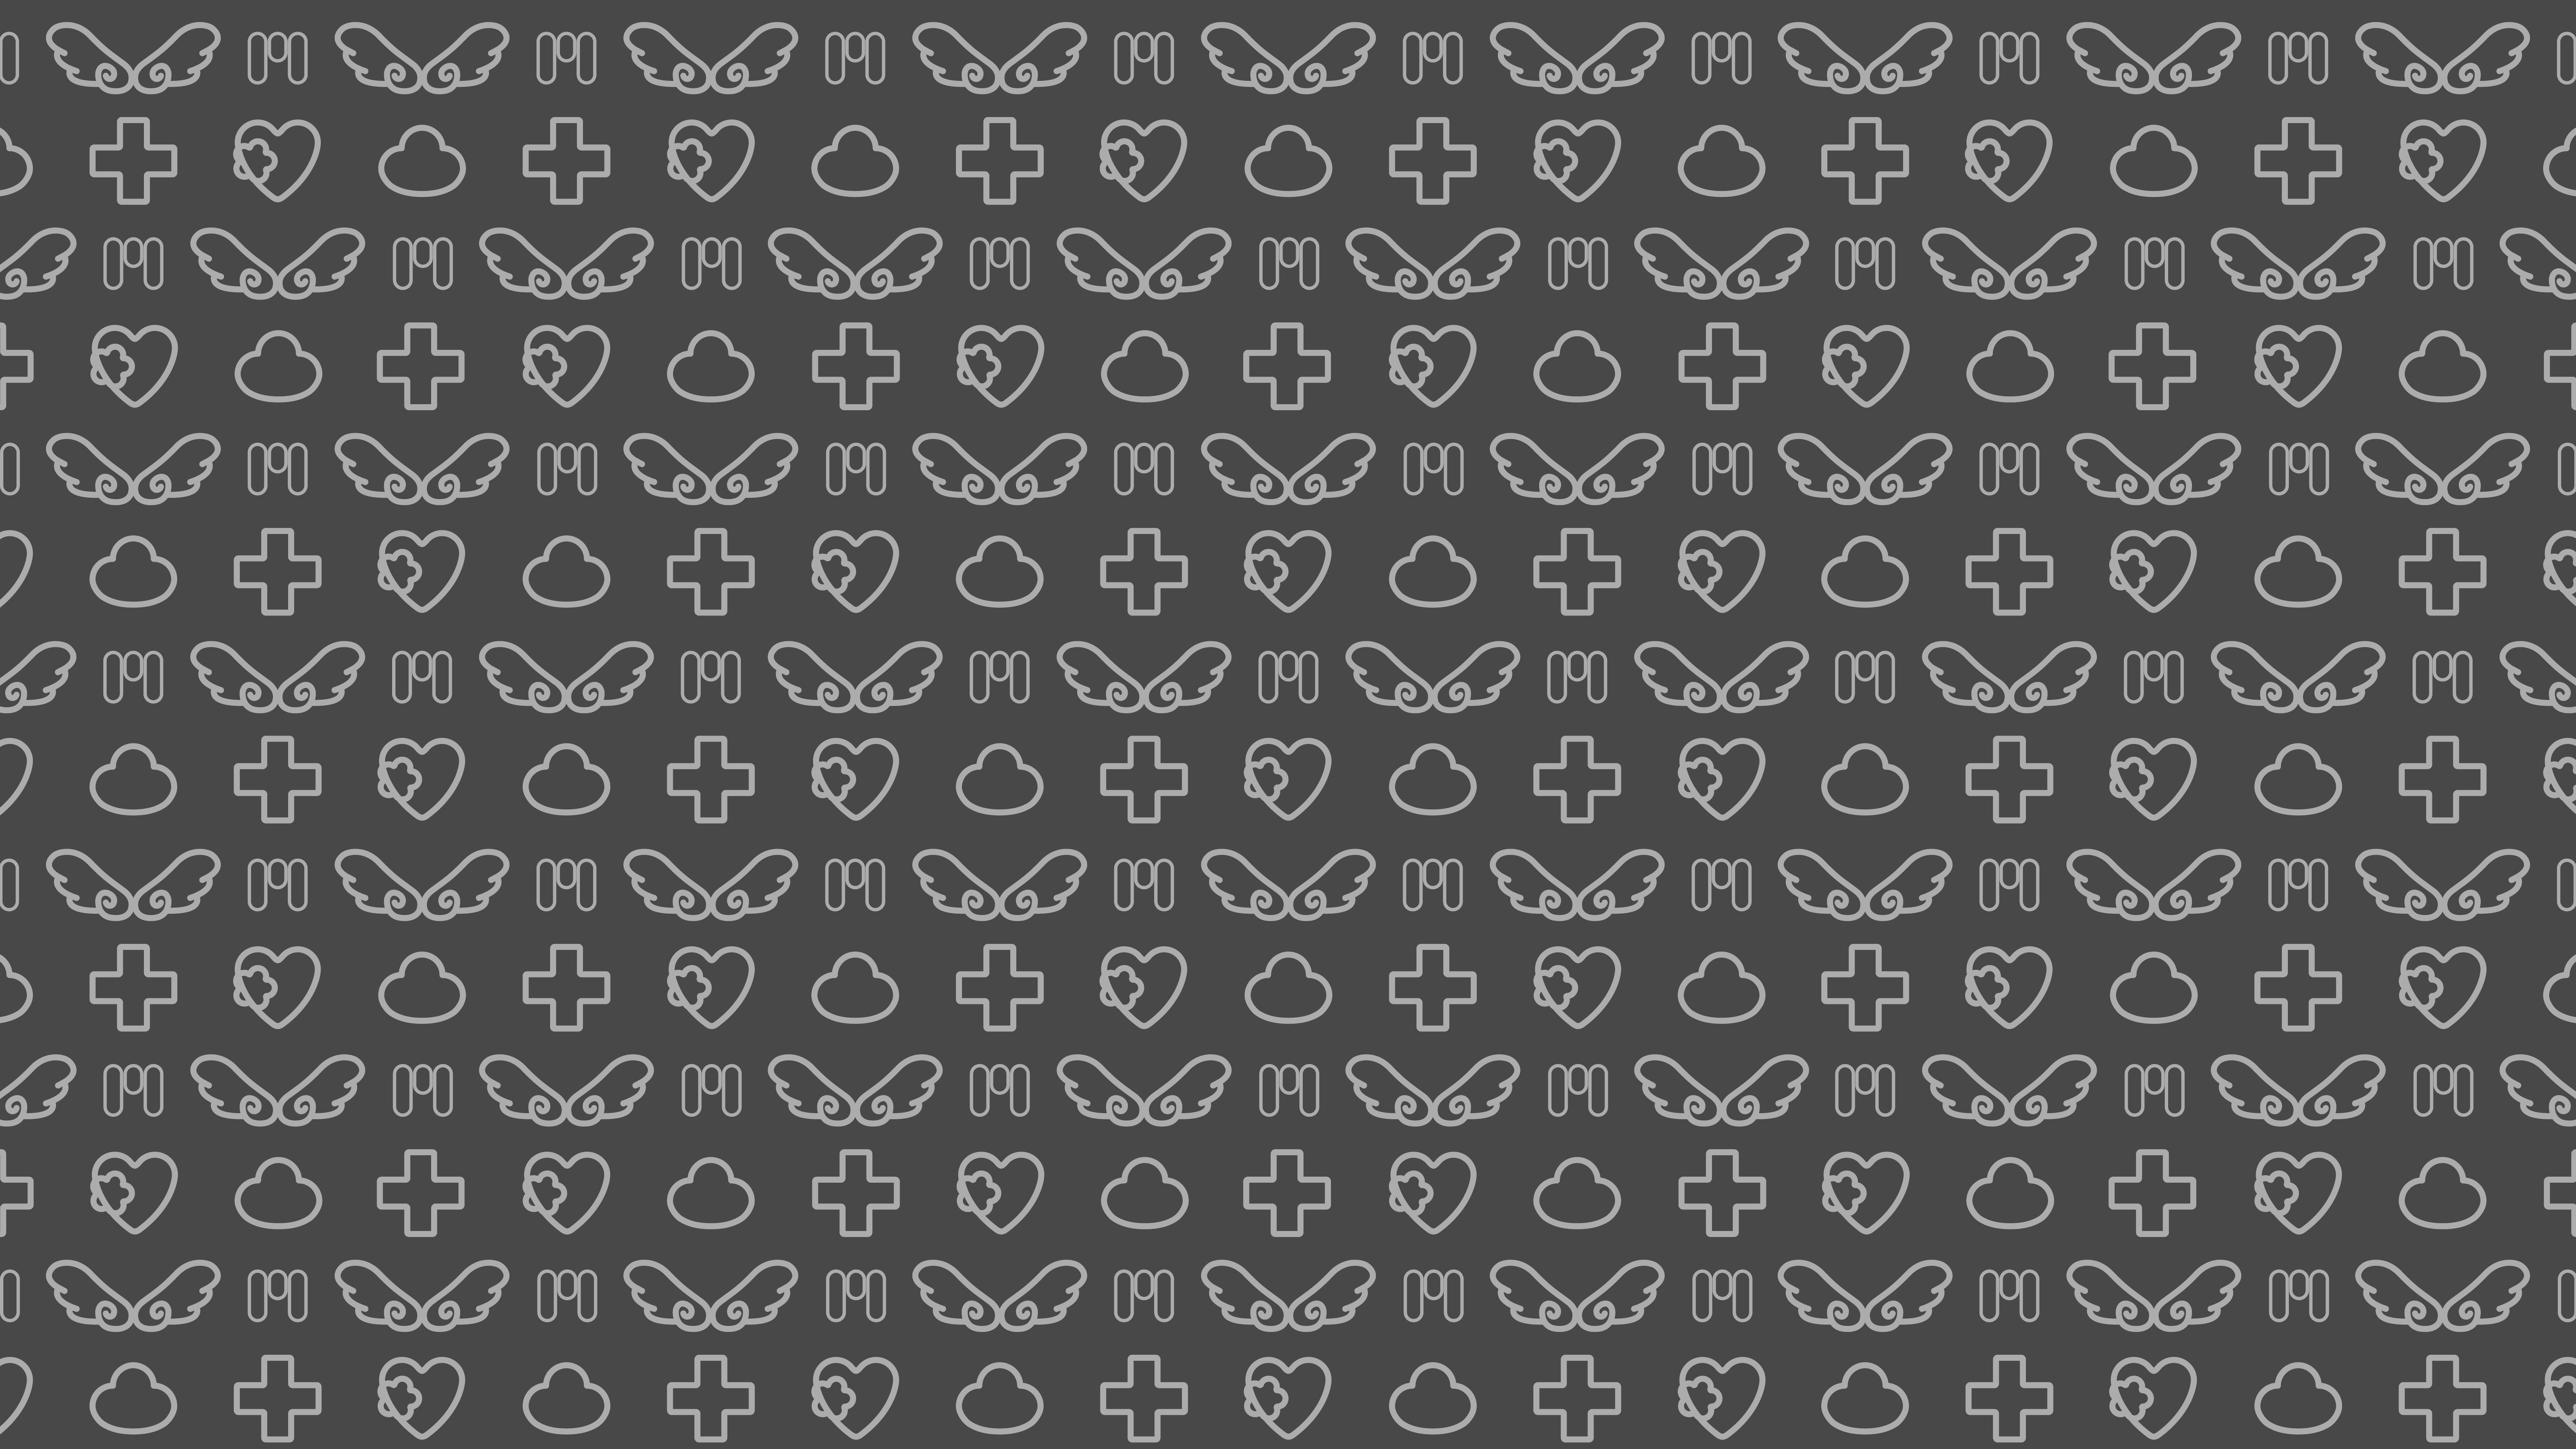 General 7680x4320 clouds wings heart (design) simple background